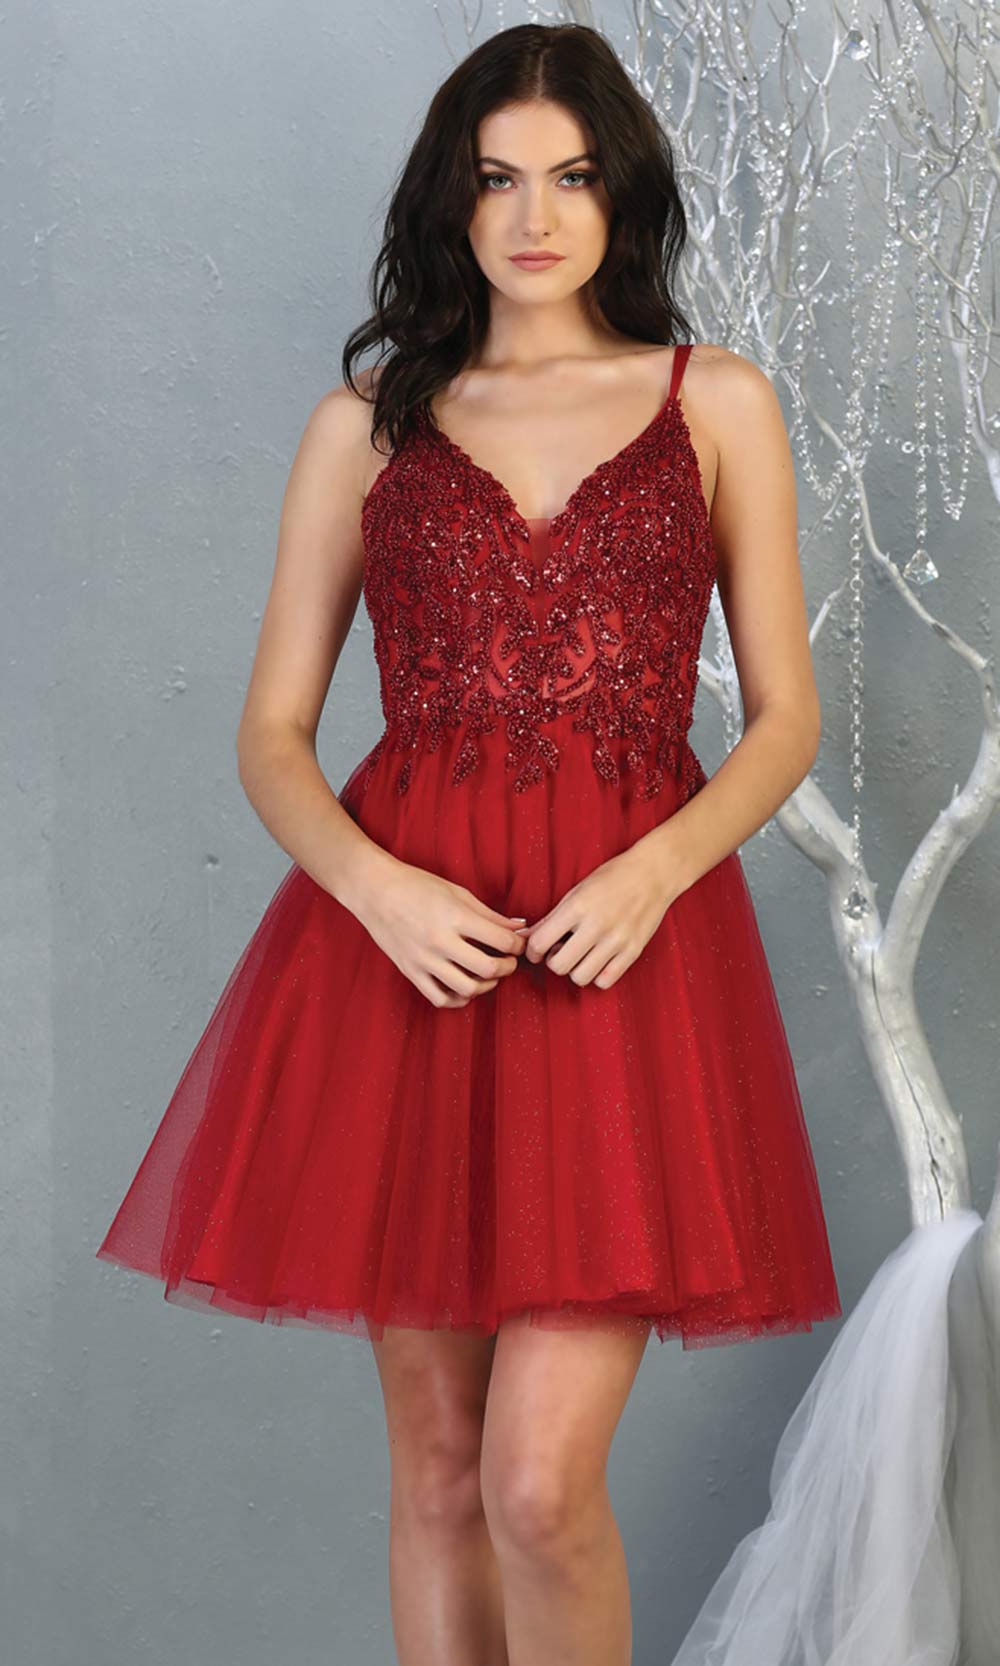 Mayqueen MQ1813 short burgundy red sequin flowy vneck grade 8 graduation dress w/ straps & puffy skirt. Dark red party dress is perfect for prom, graduation, grade 8 grad, confirmation dress, bat mitzvah dress, damas. Plus sizes avail for grad dress.jpggrade 8 grad dresses, graduation dresses